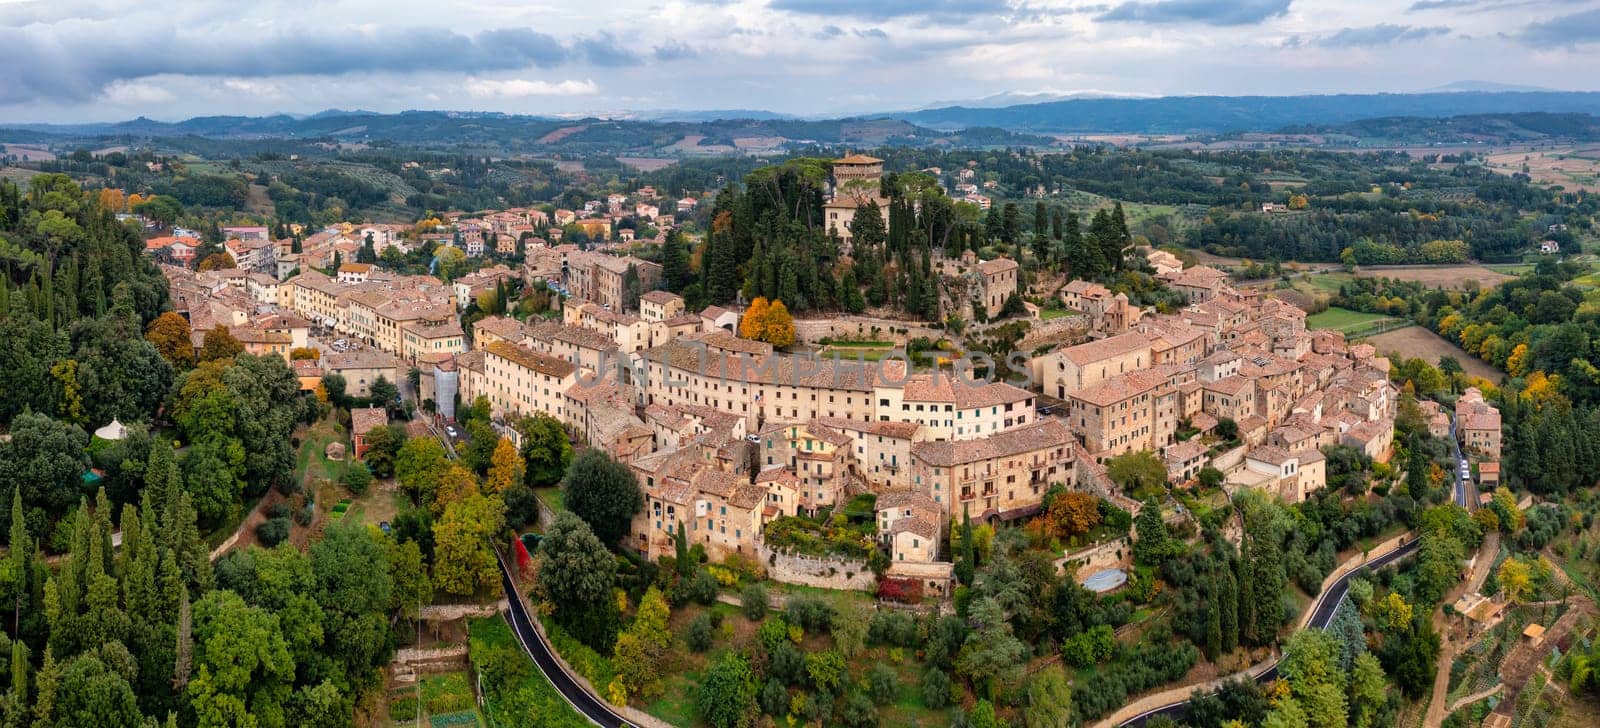 Cetona, Travel in Tuscany, Italy. Magnificent view of the ancient hilltop village of Cetona, Siena, Italy.